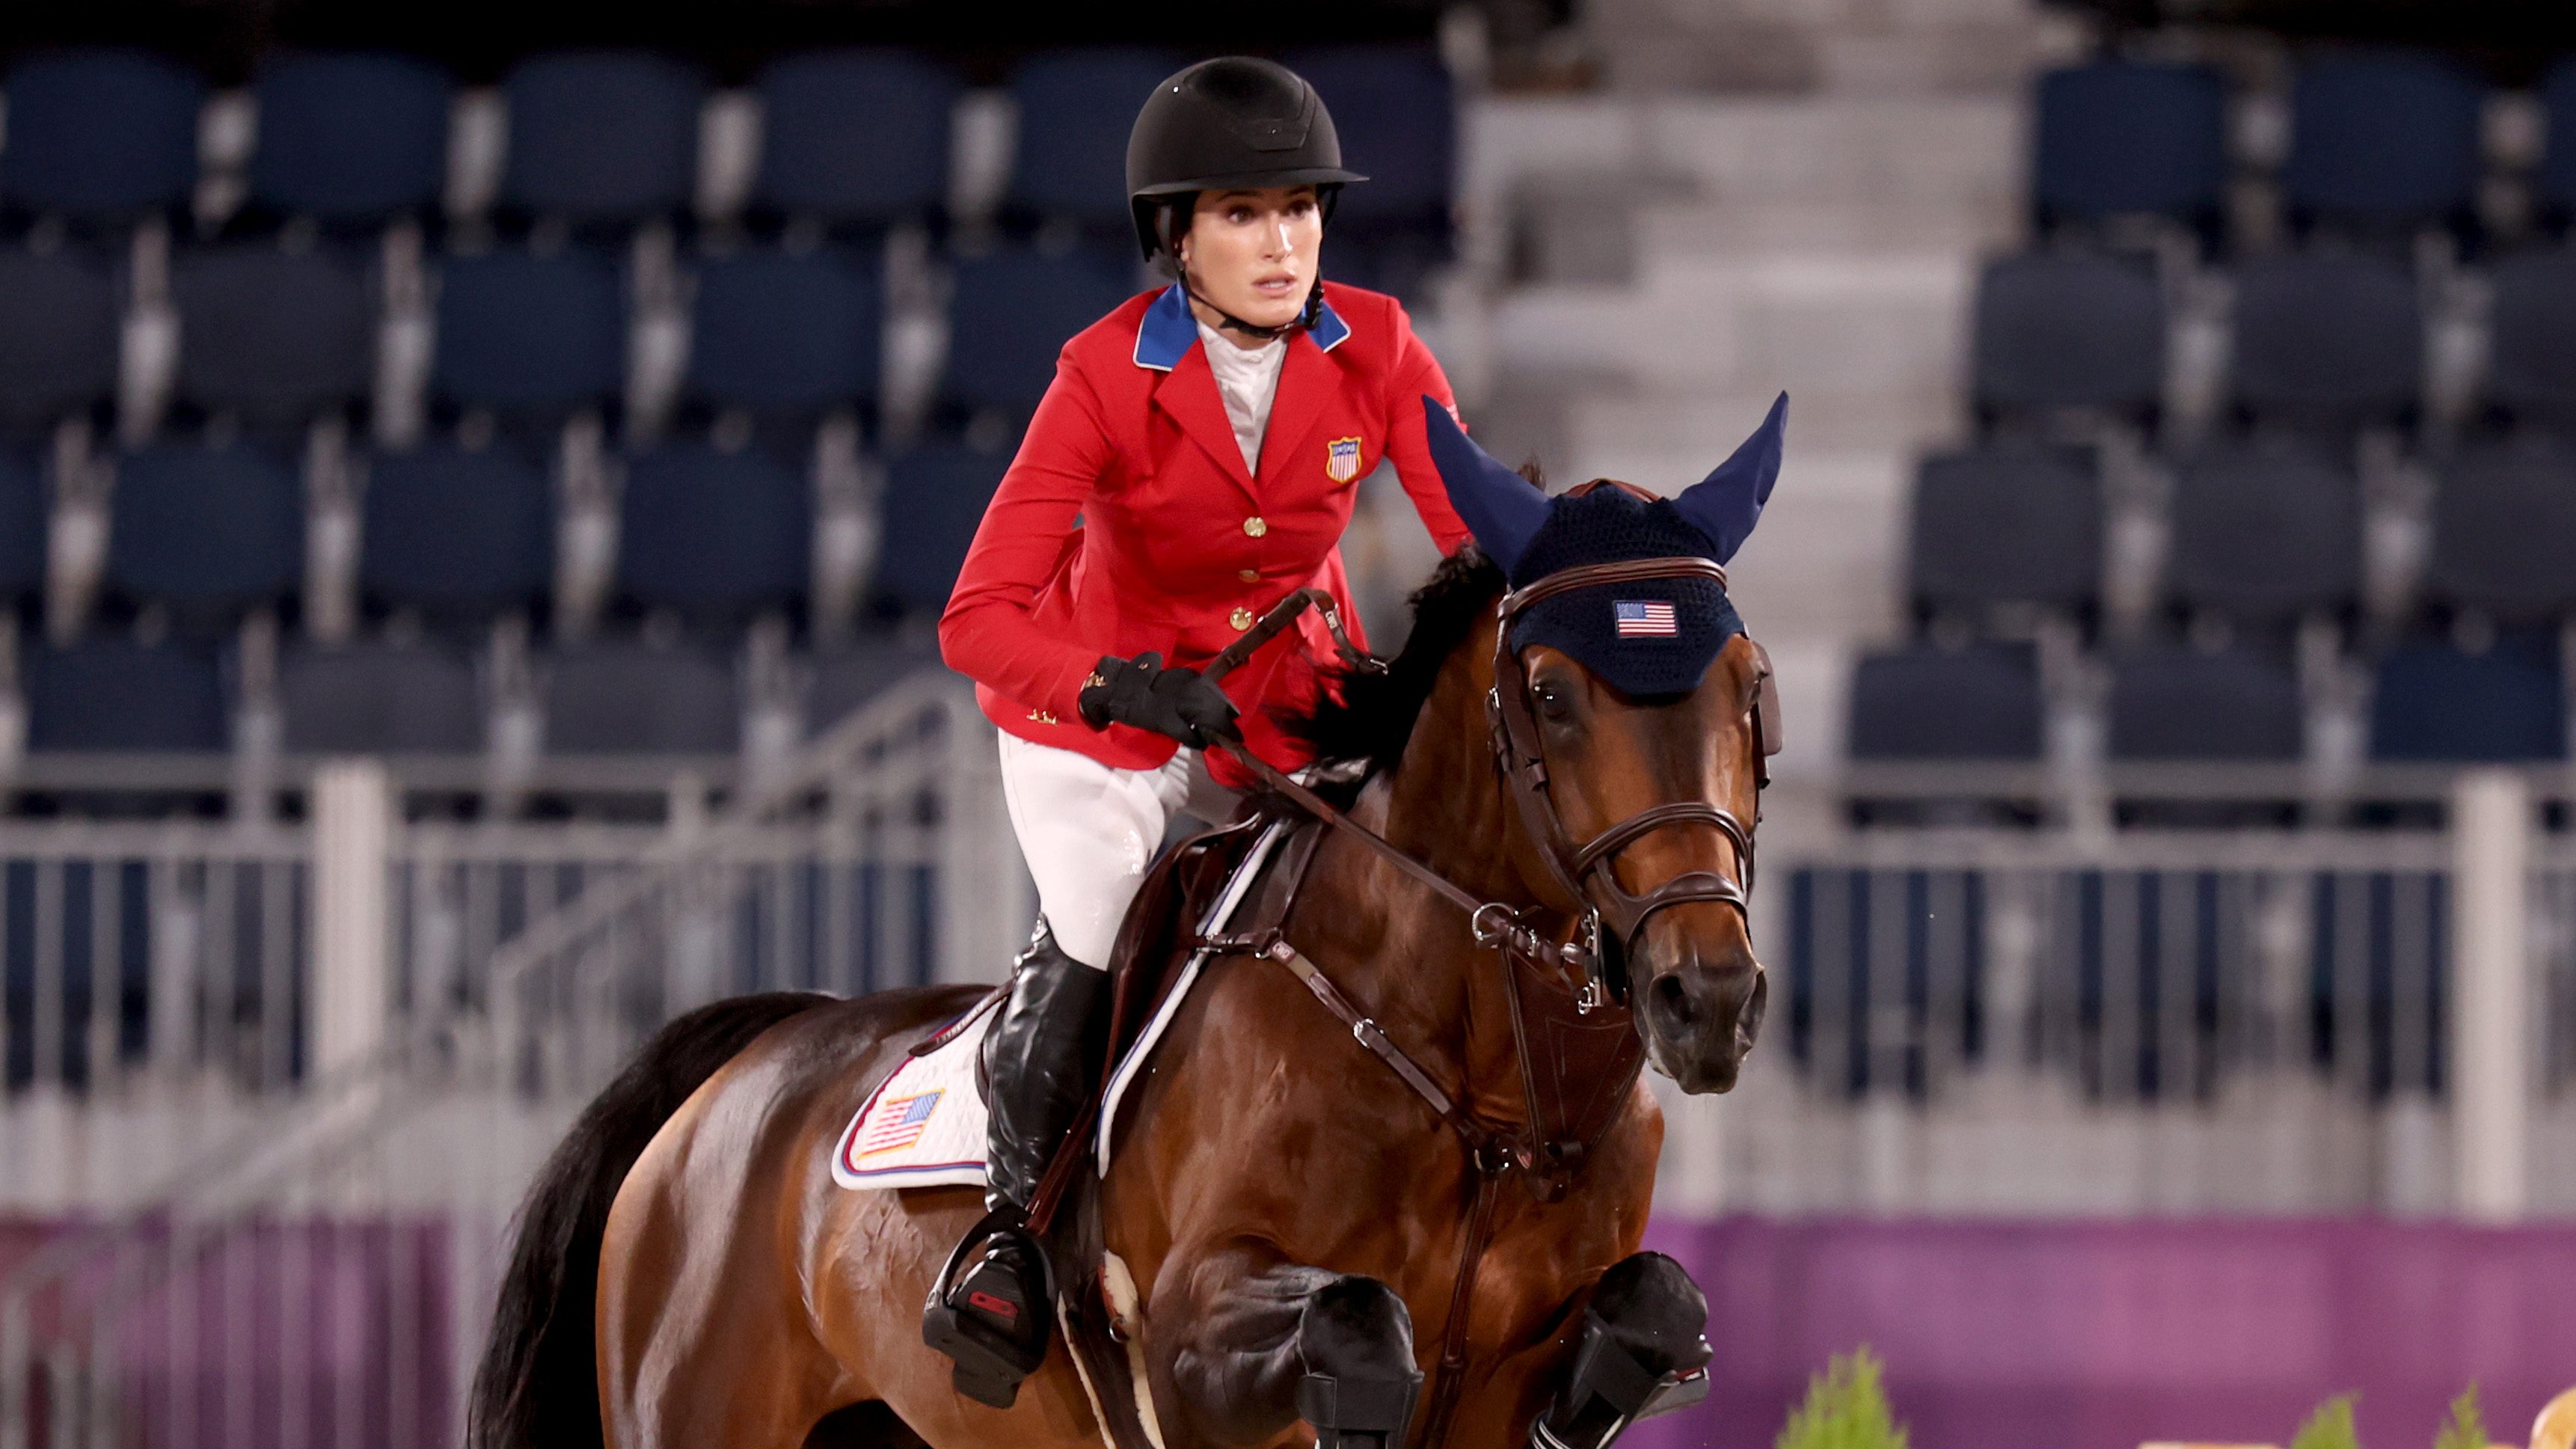 Jessica Springsteen, US equestrian team compete for Olympic gold